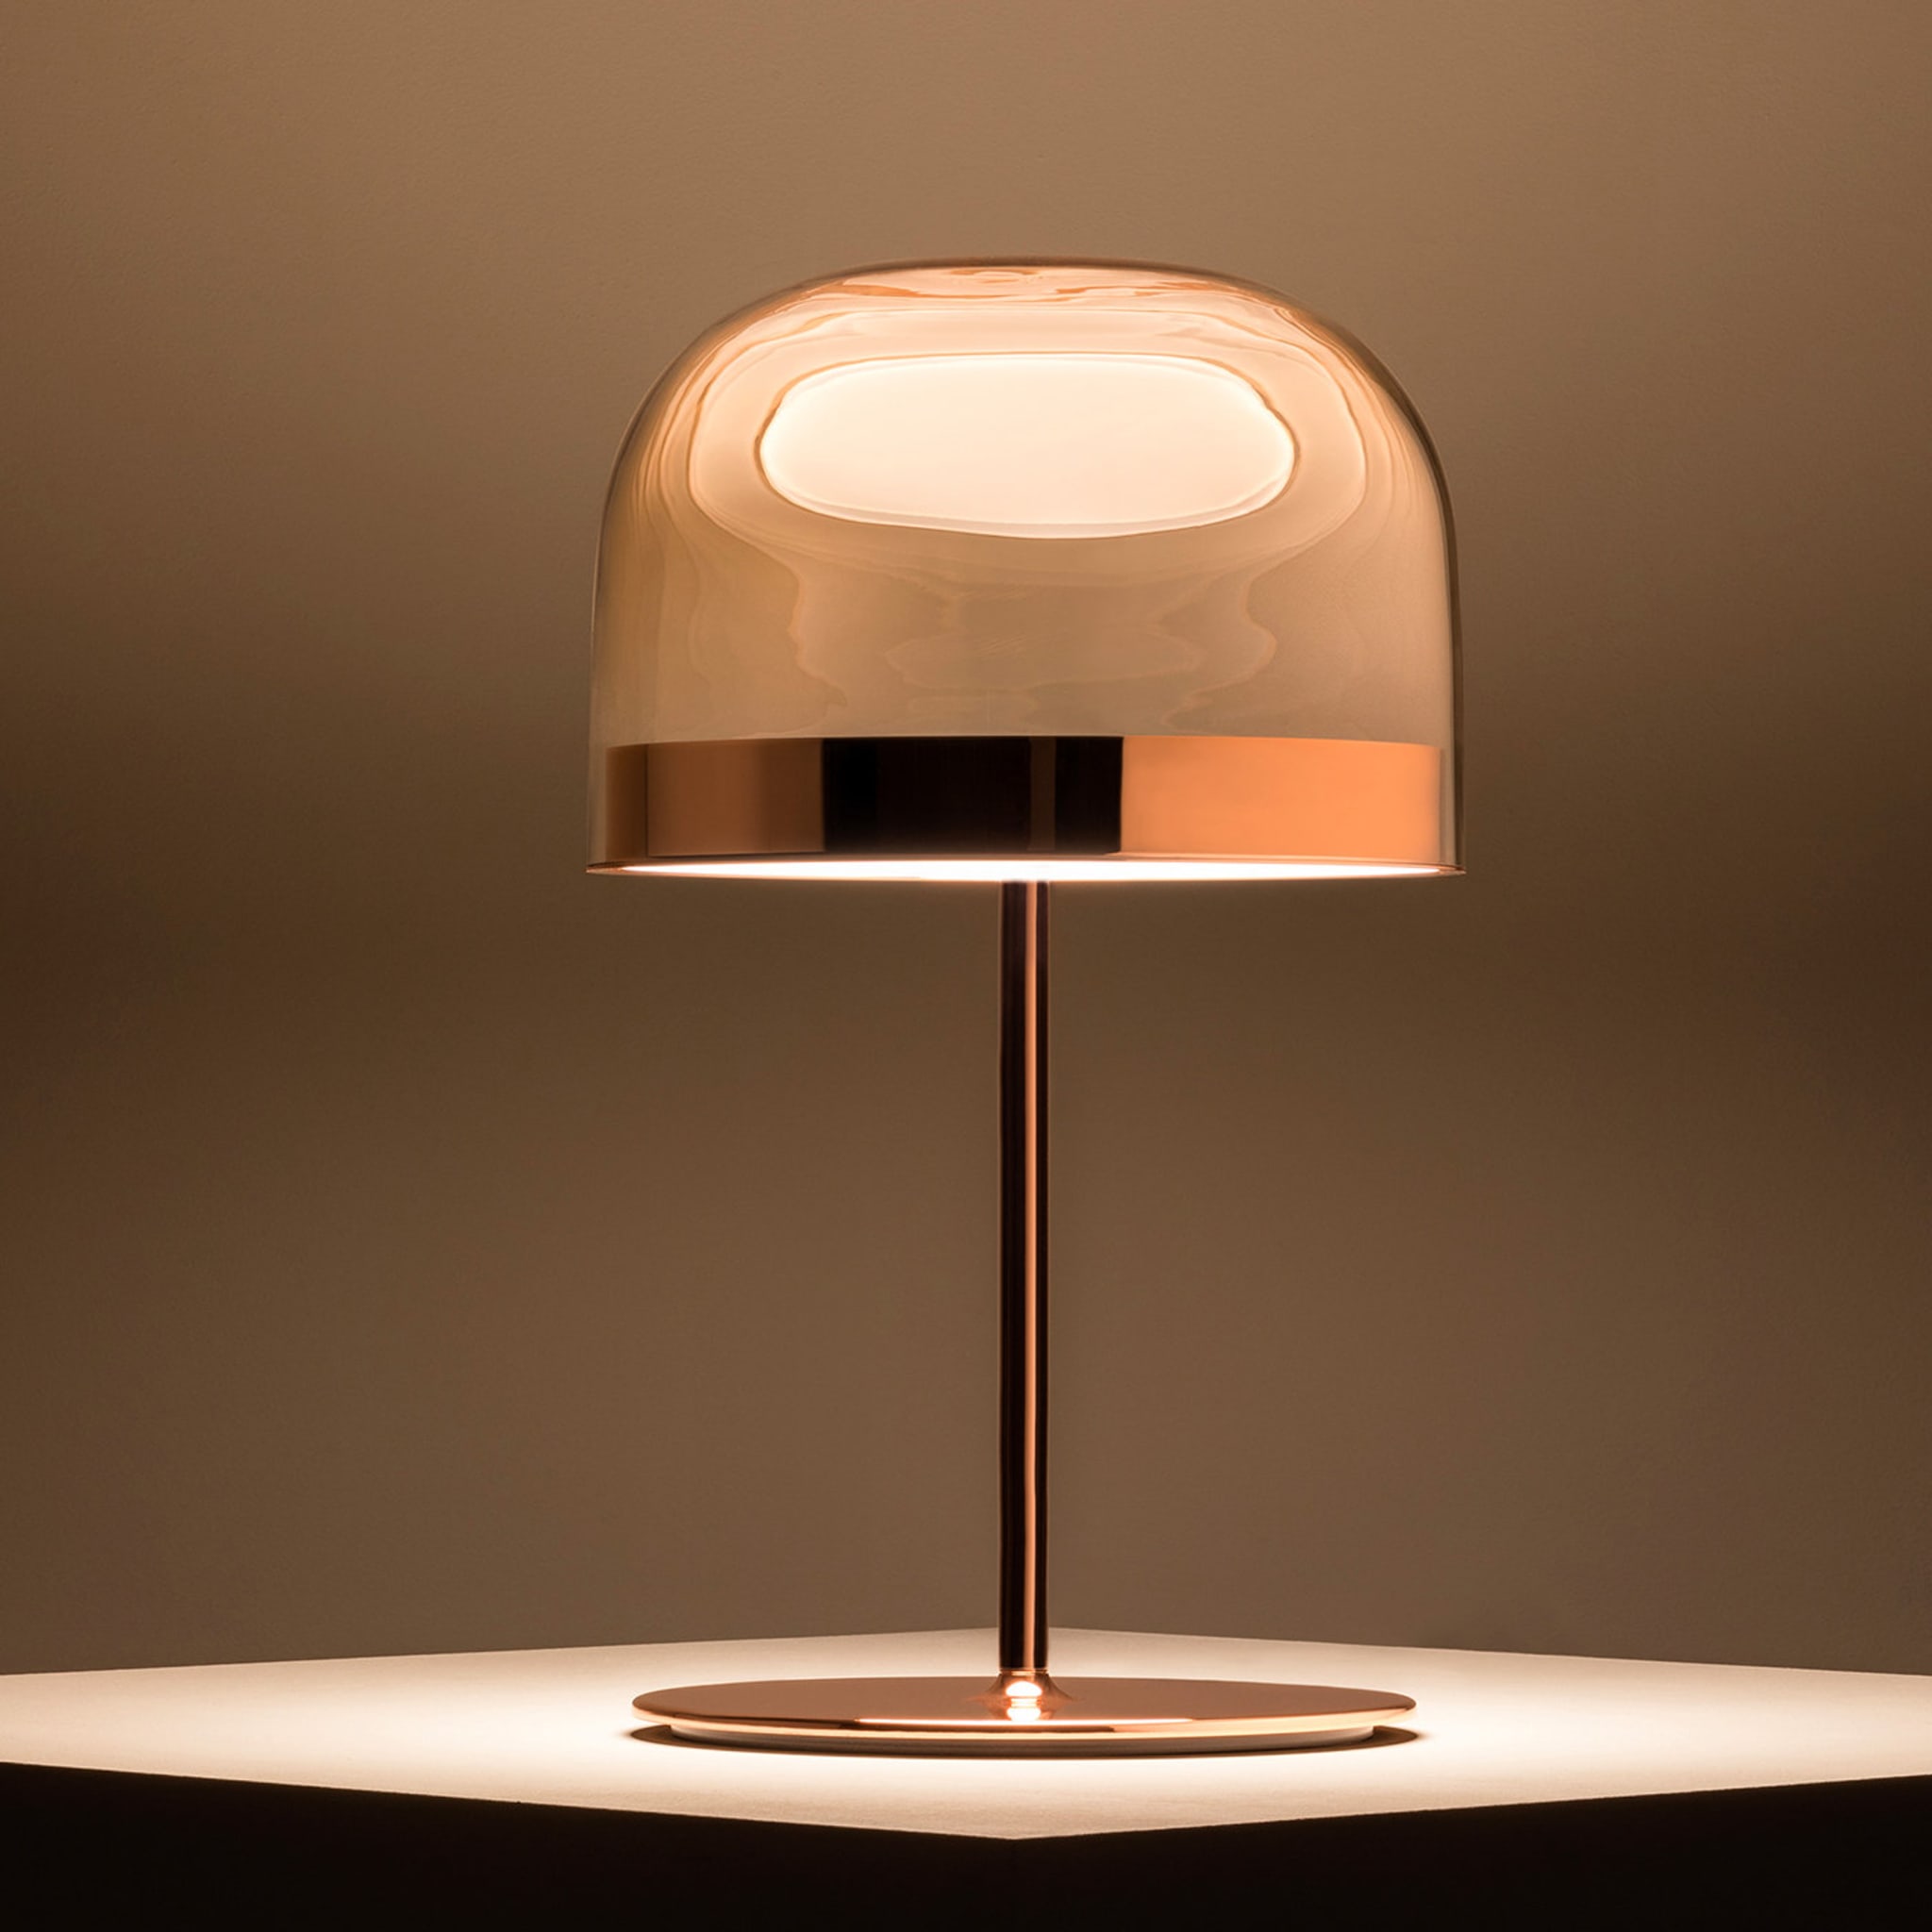 Equatore Table Lamp by Gabriele and Oscar Buratti - Alternative view 1